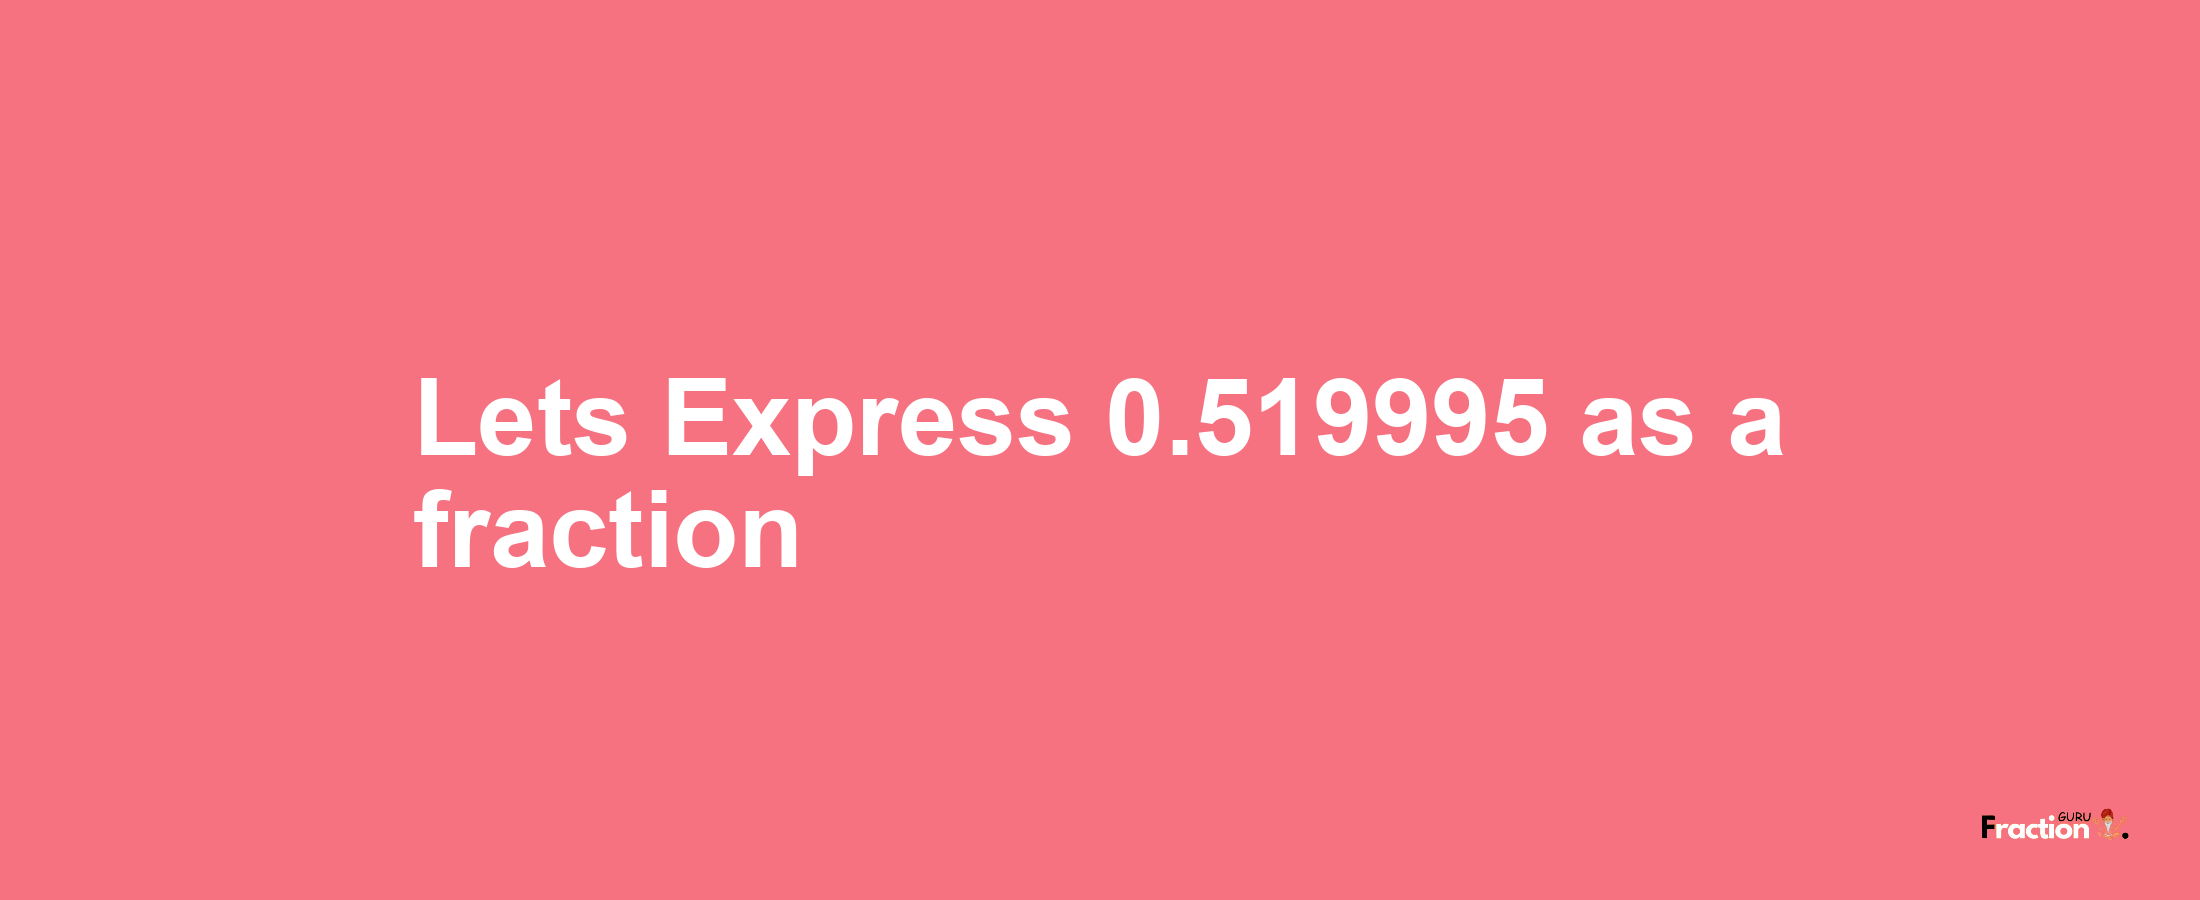 Lets Express 0.519995 as afraction